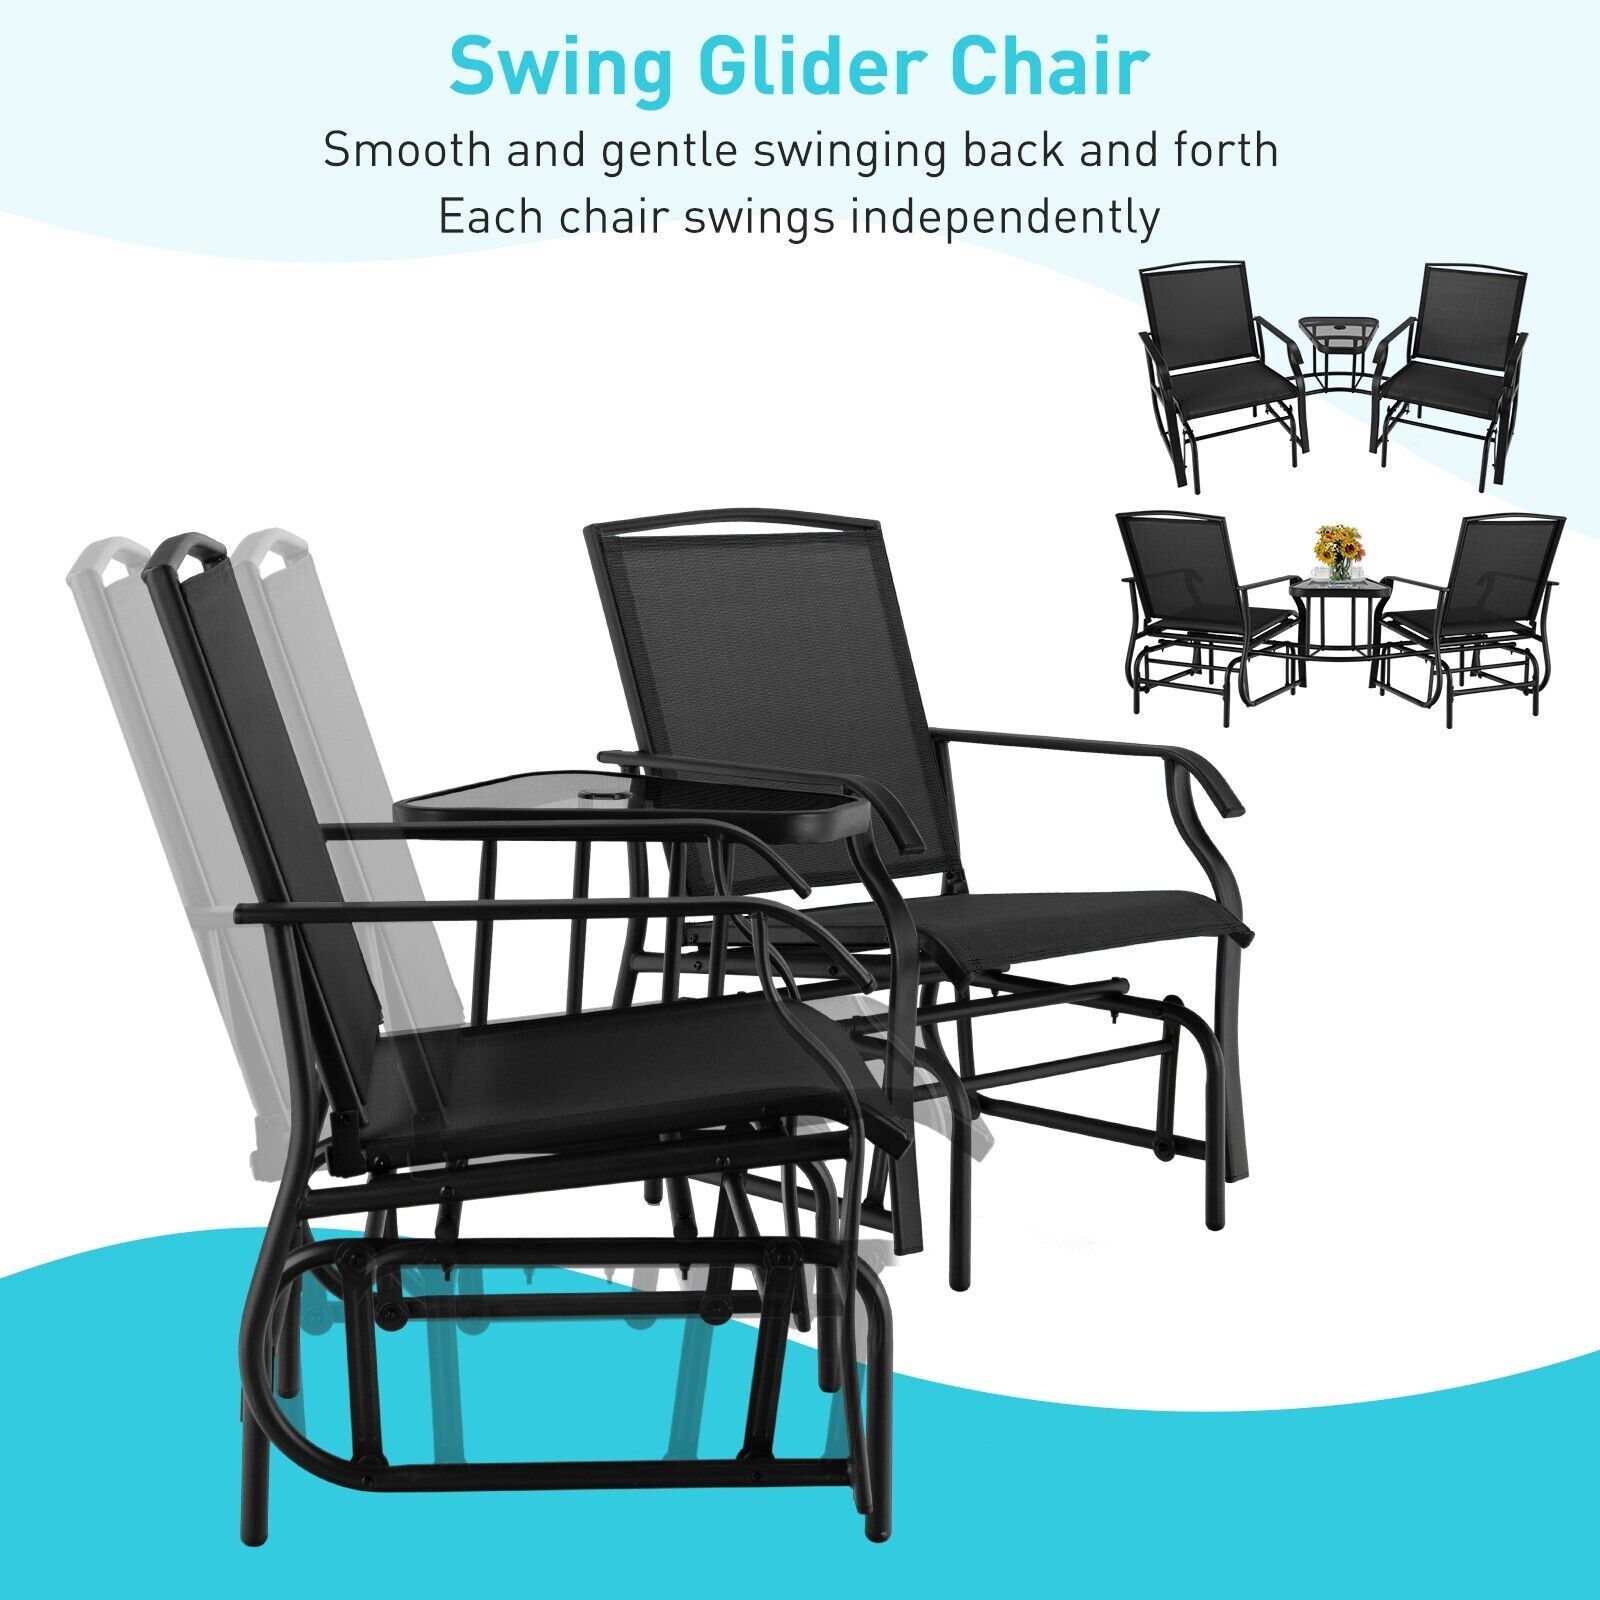 Outdoor Double Swing Glider Chair Set with Table and Umbrella Hole